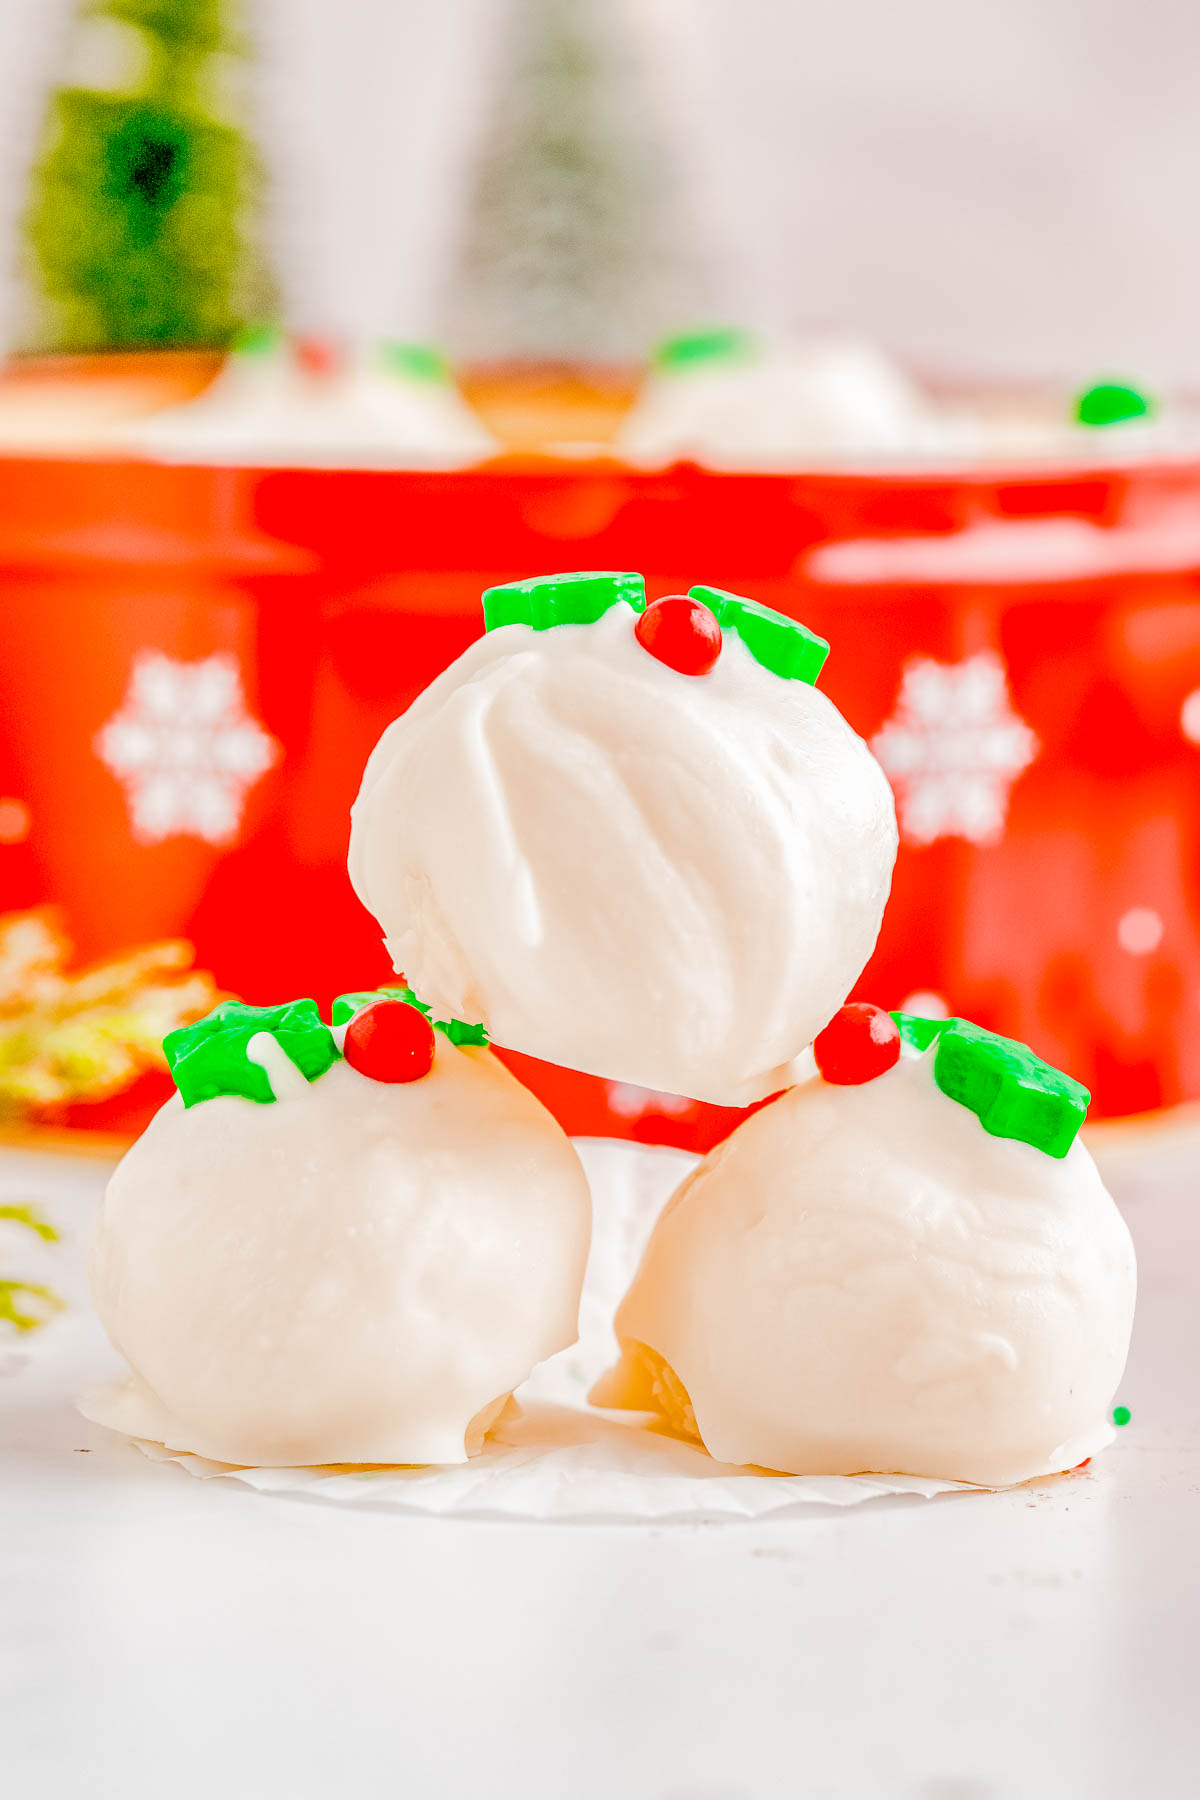 White Chocolate Truffles - Made with real butter, heavy cream, and a double dose of white chocolate in both the filling and the coating, these EASY truffles are CREAMY, decadent, and perfect for the holidays! Make this festive no-bake candy recipe for your next Christmas party, holiday entertaining, gift them to a special friend, or bring them along as a hostess gift. Everyone will appreciate these decadent little treats! 